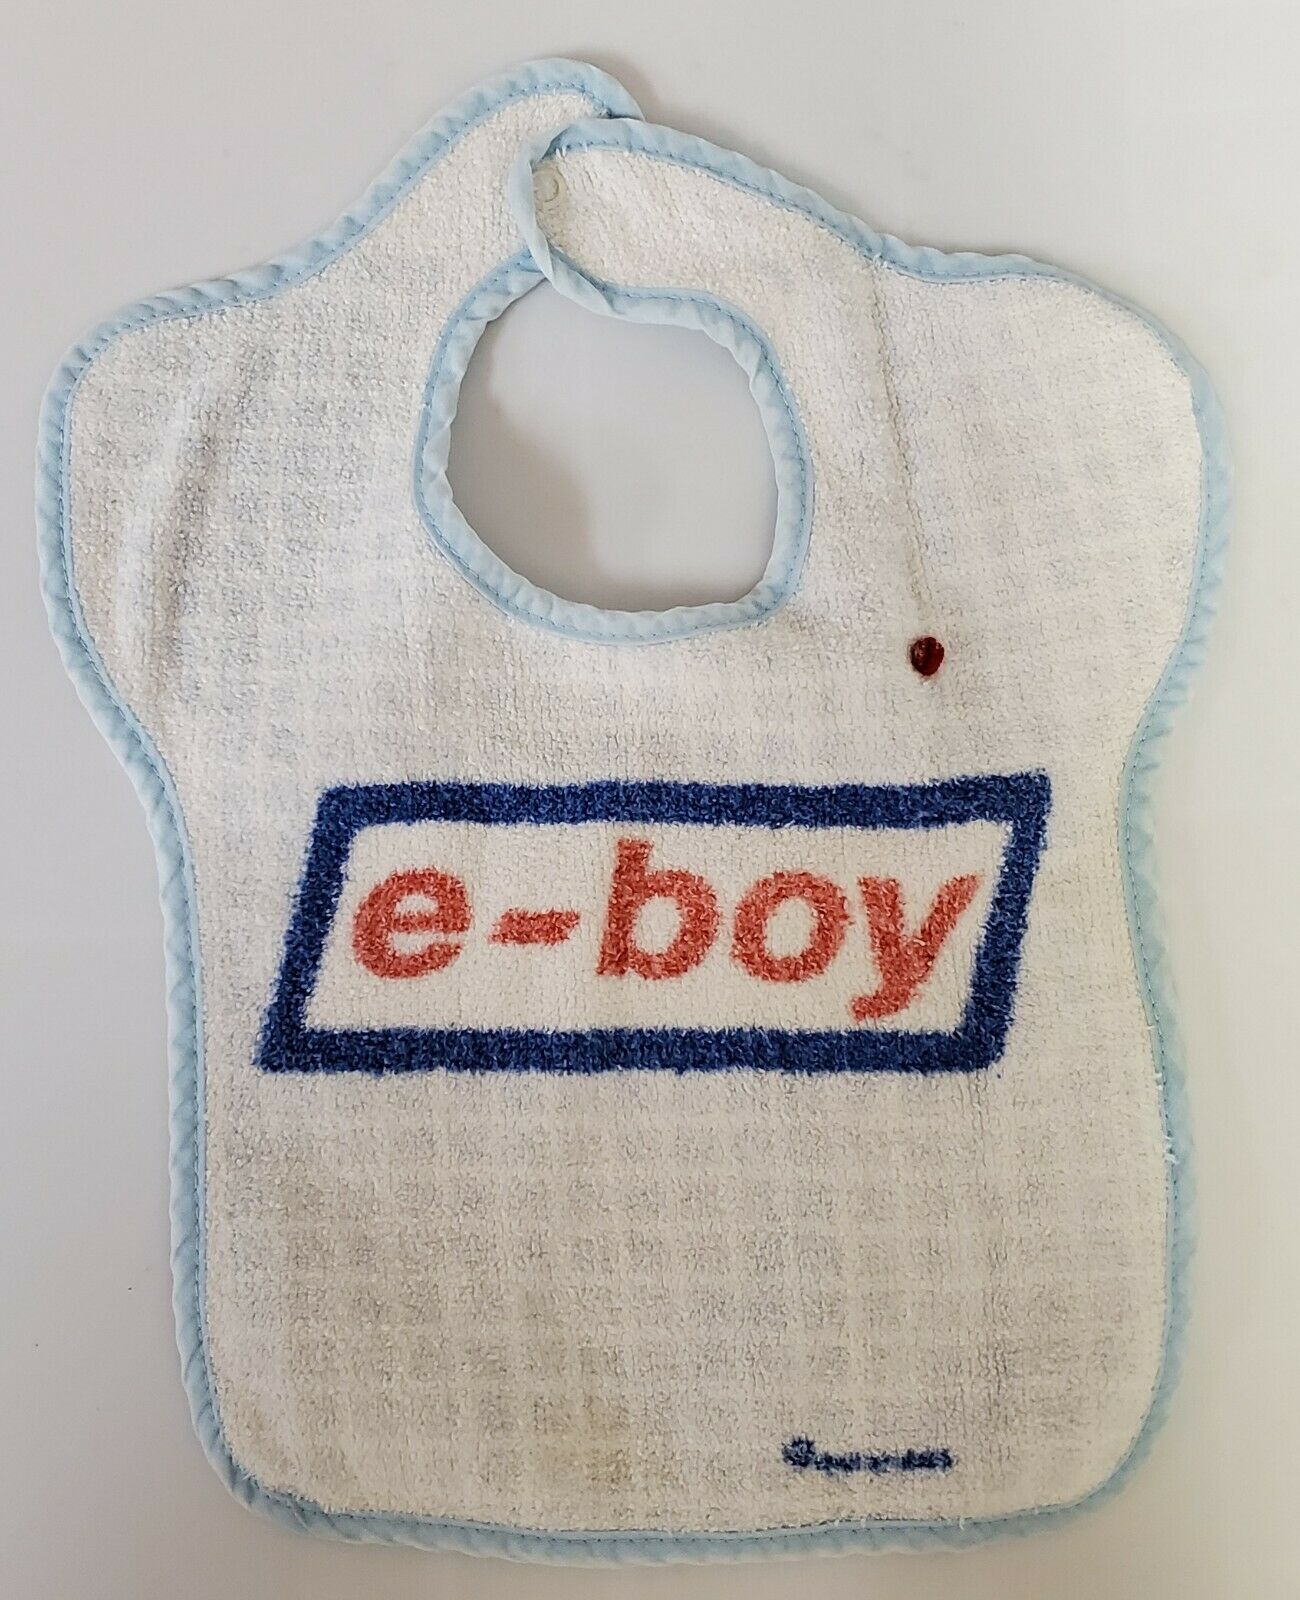 Mother Maid Vintage Baby Bib Terry Cloth E-boy White/blue Adjustable Snap